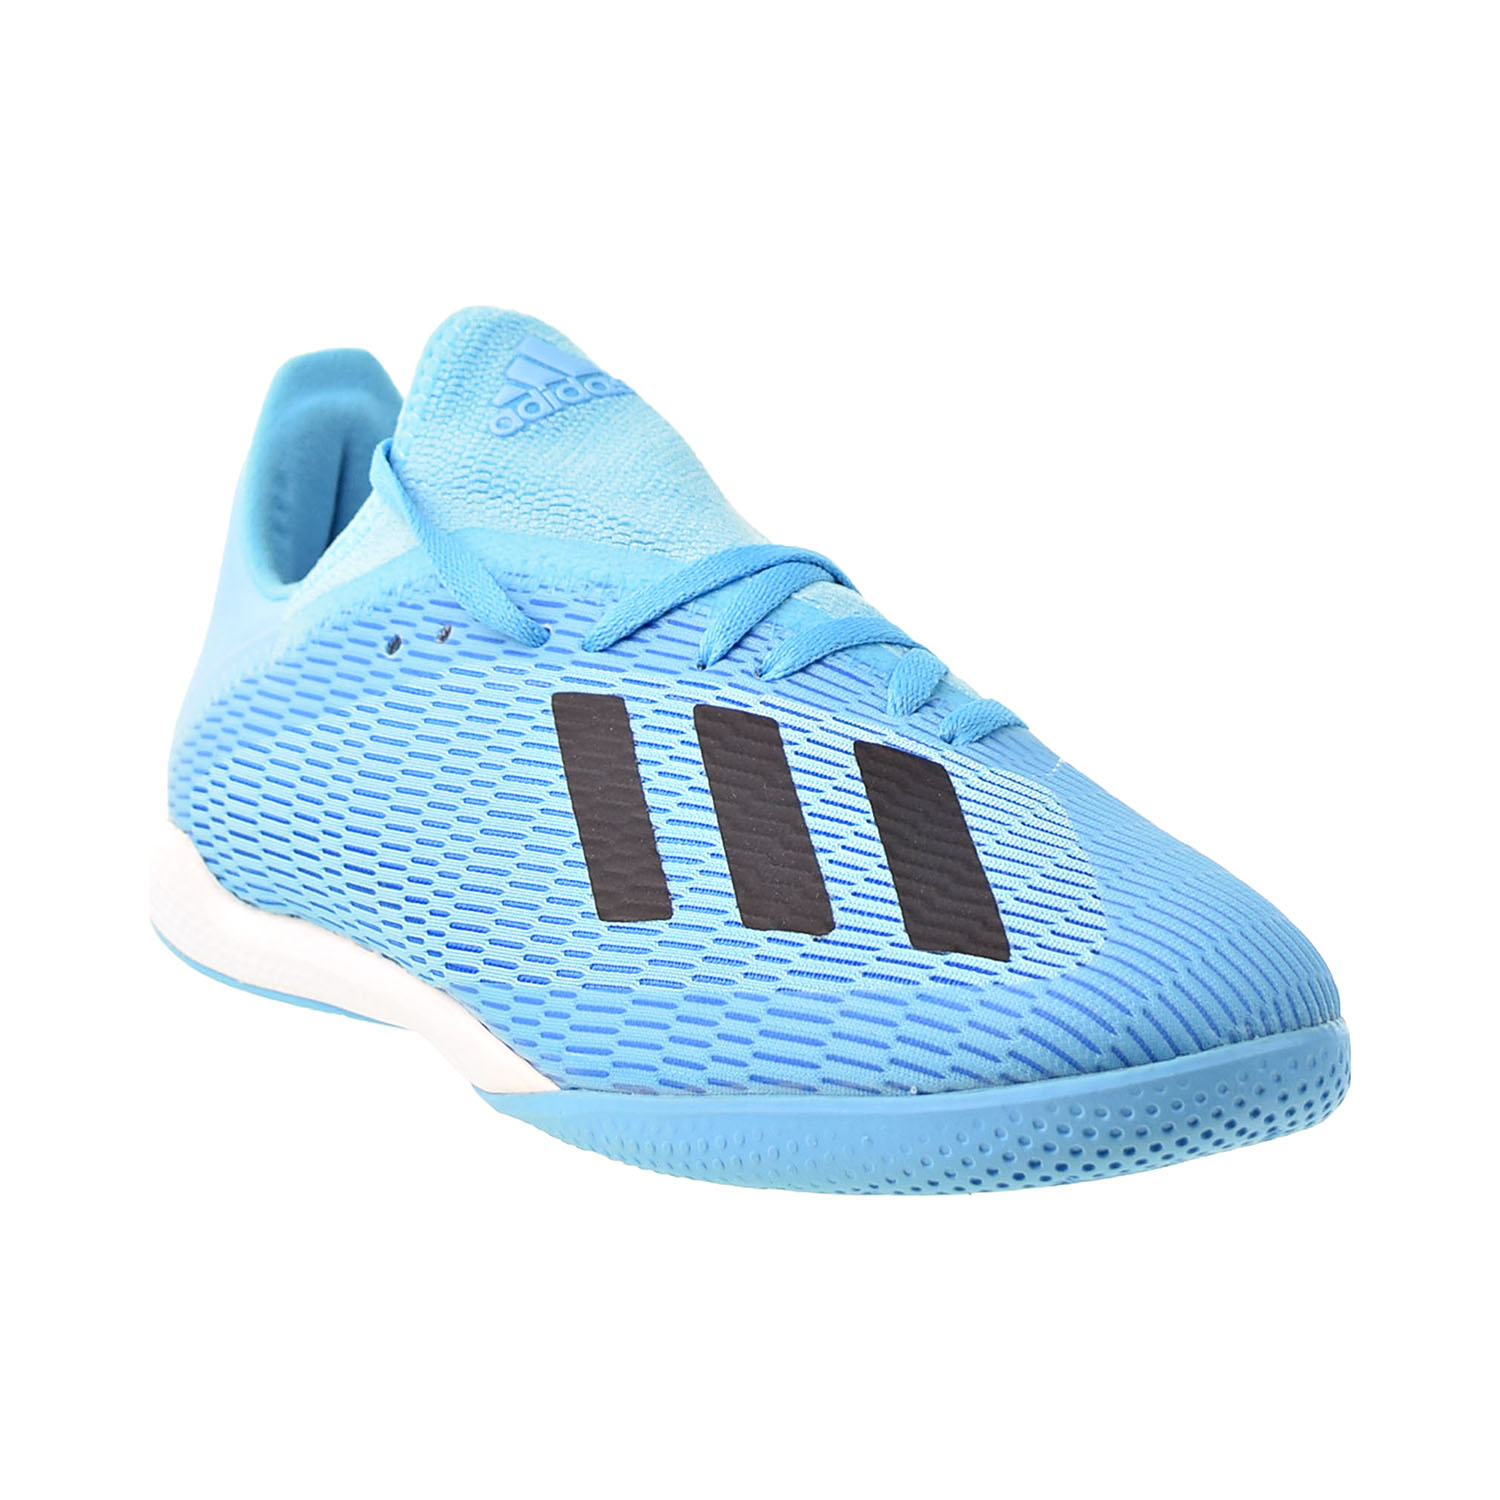 Adidas Adidas X 19.3 Indoor Soccer Men's Shoes Bright Cyan-Core Black-Shock Pink f35371